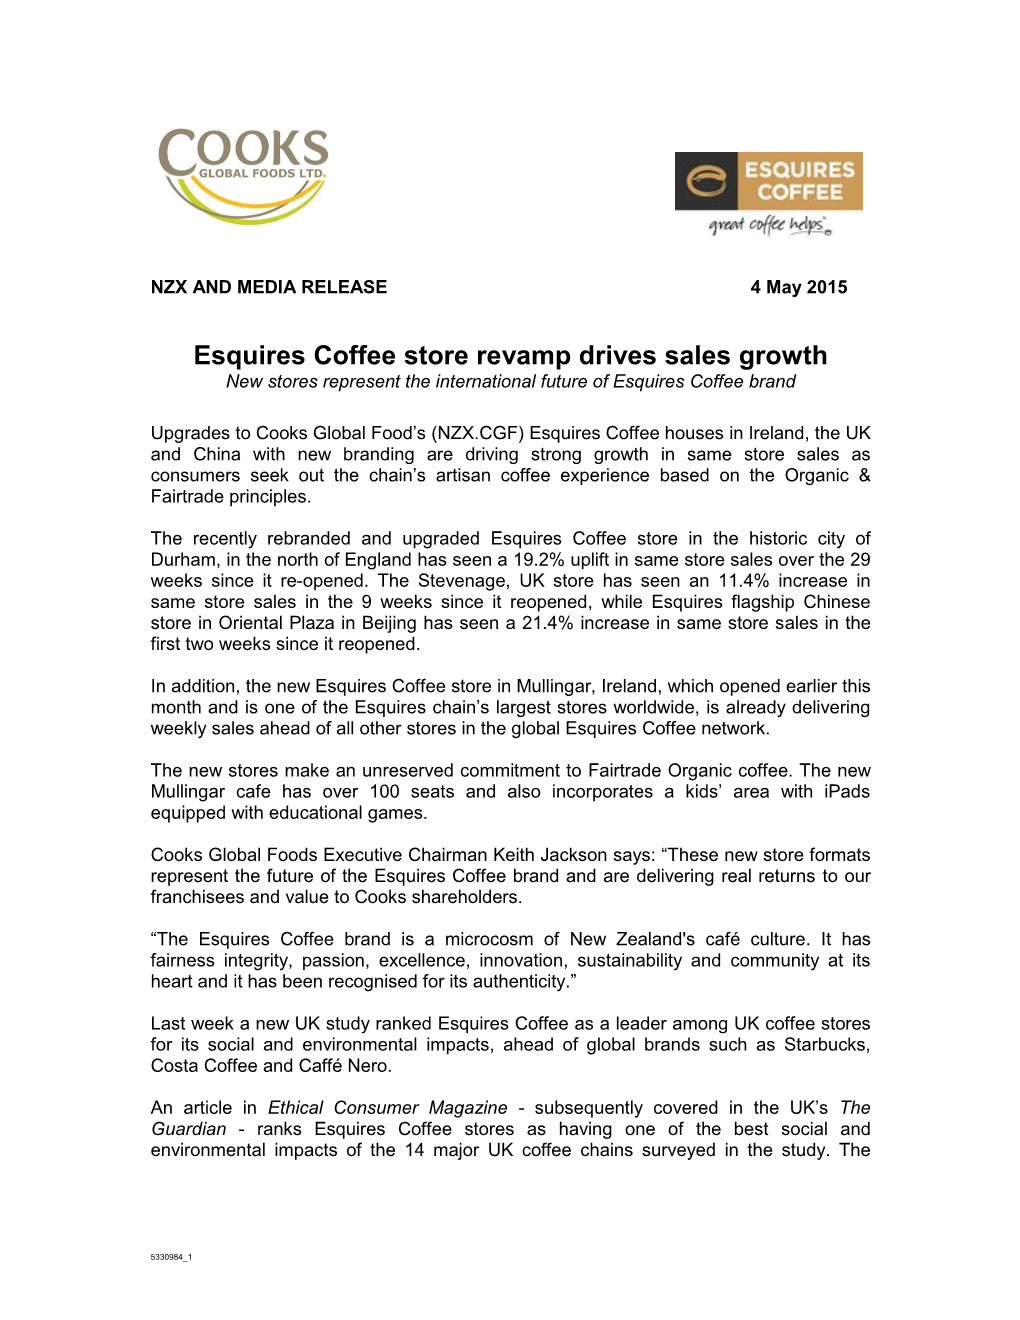 Esquires Coffee Store Revamp Drives Sales Growth New Stores Represent the International Future of Esquires Coffee Brand